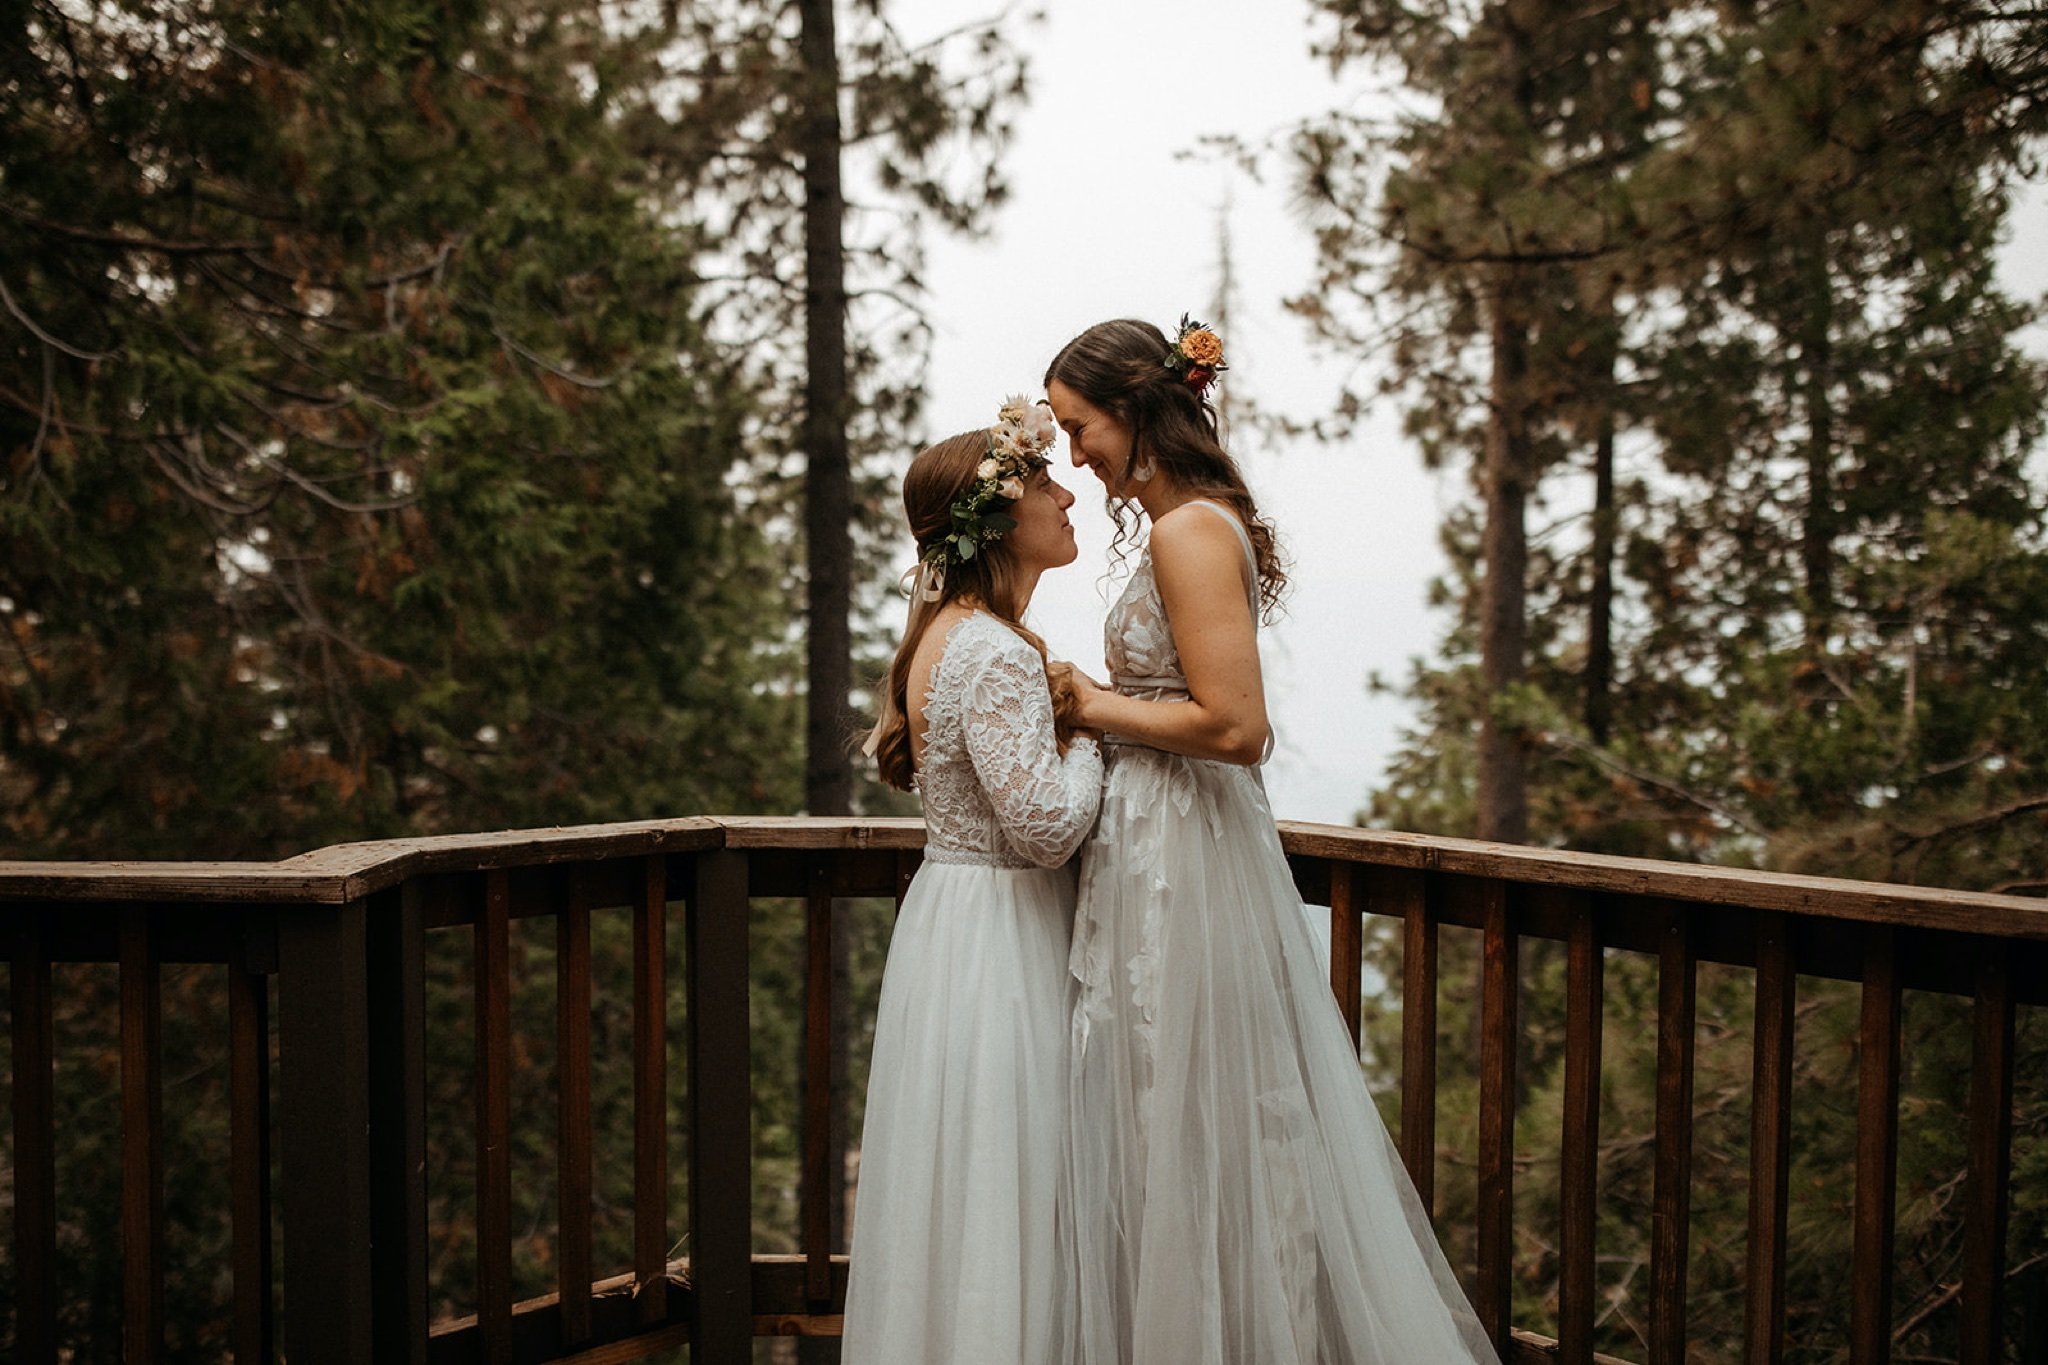 Yosemite National Park Elopement with Two Brides-Will Khoury22.jpg